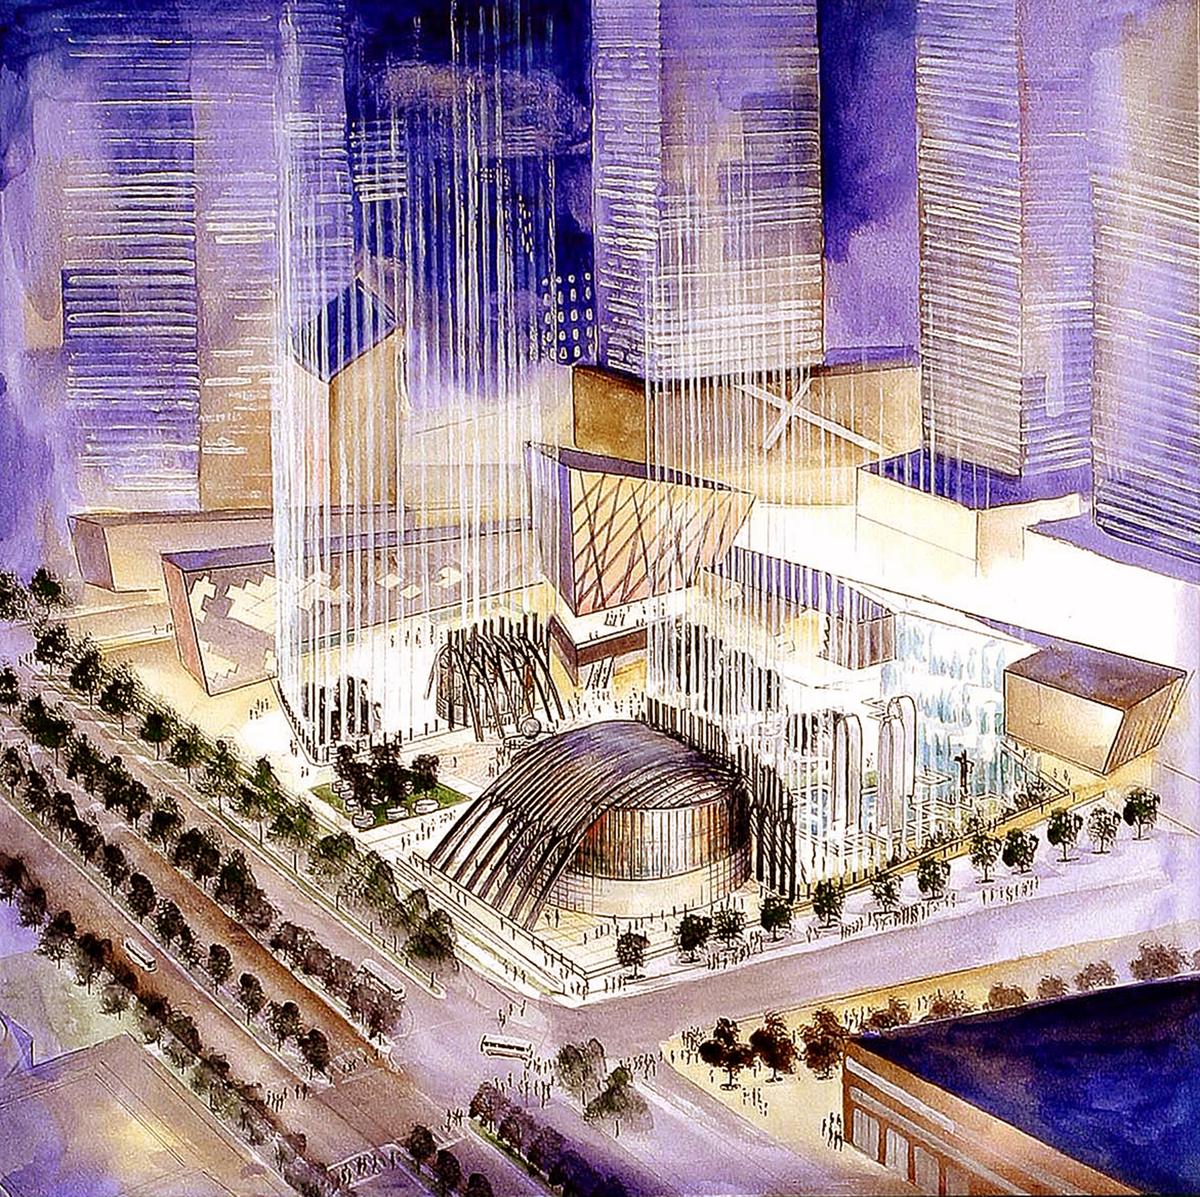 Concept for the Wilhelmy American Flag Glass Pipe Organ at Ground Zero in Manhattan. (Courtesy of Bob Kirchman)